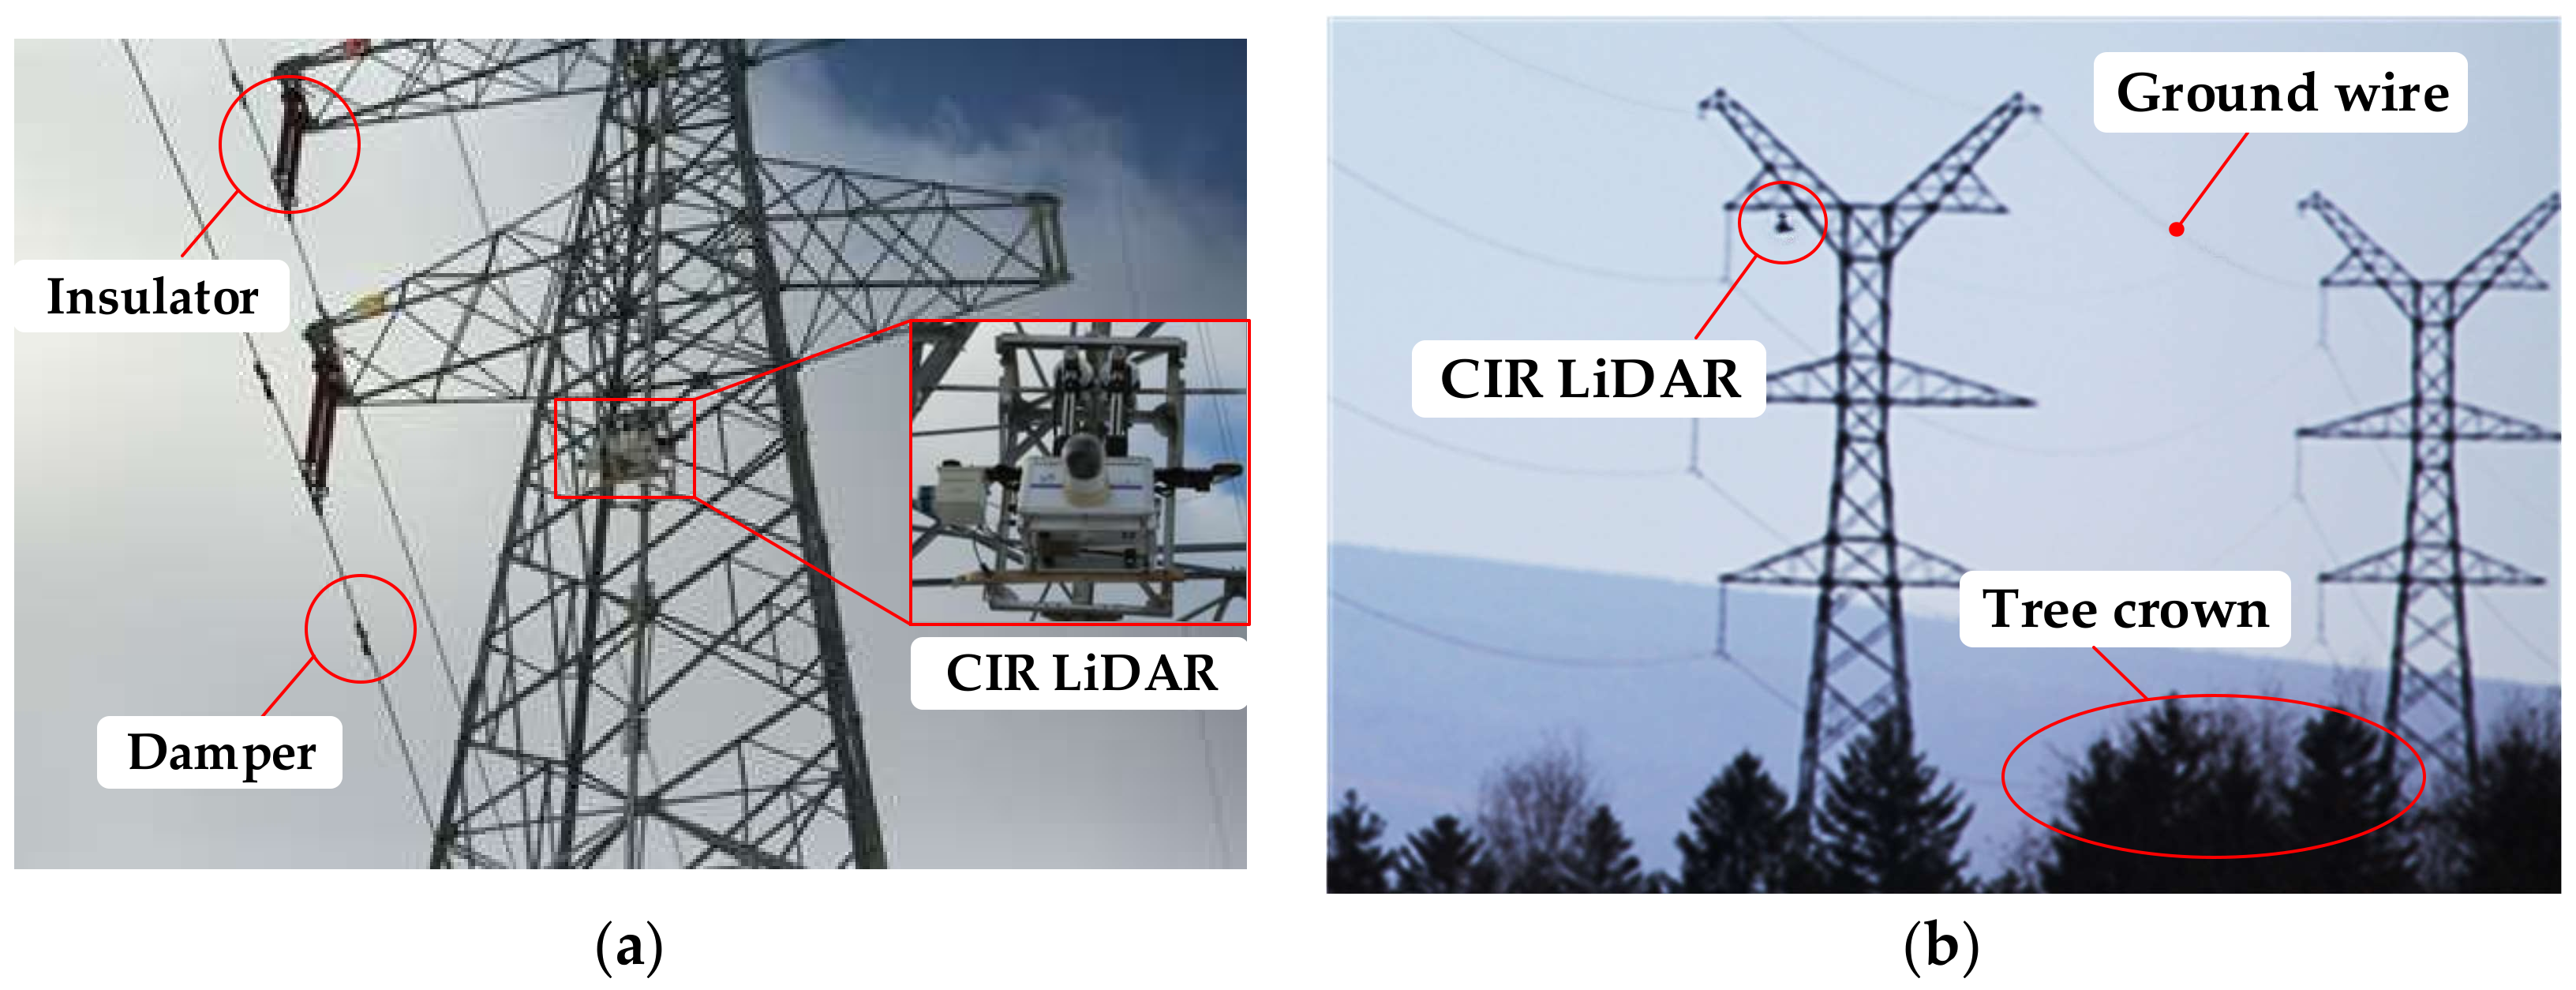 Sensors | Free Full-Text | Detecting Inspection Objects of Power Line ...